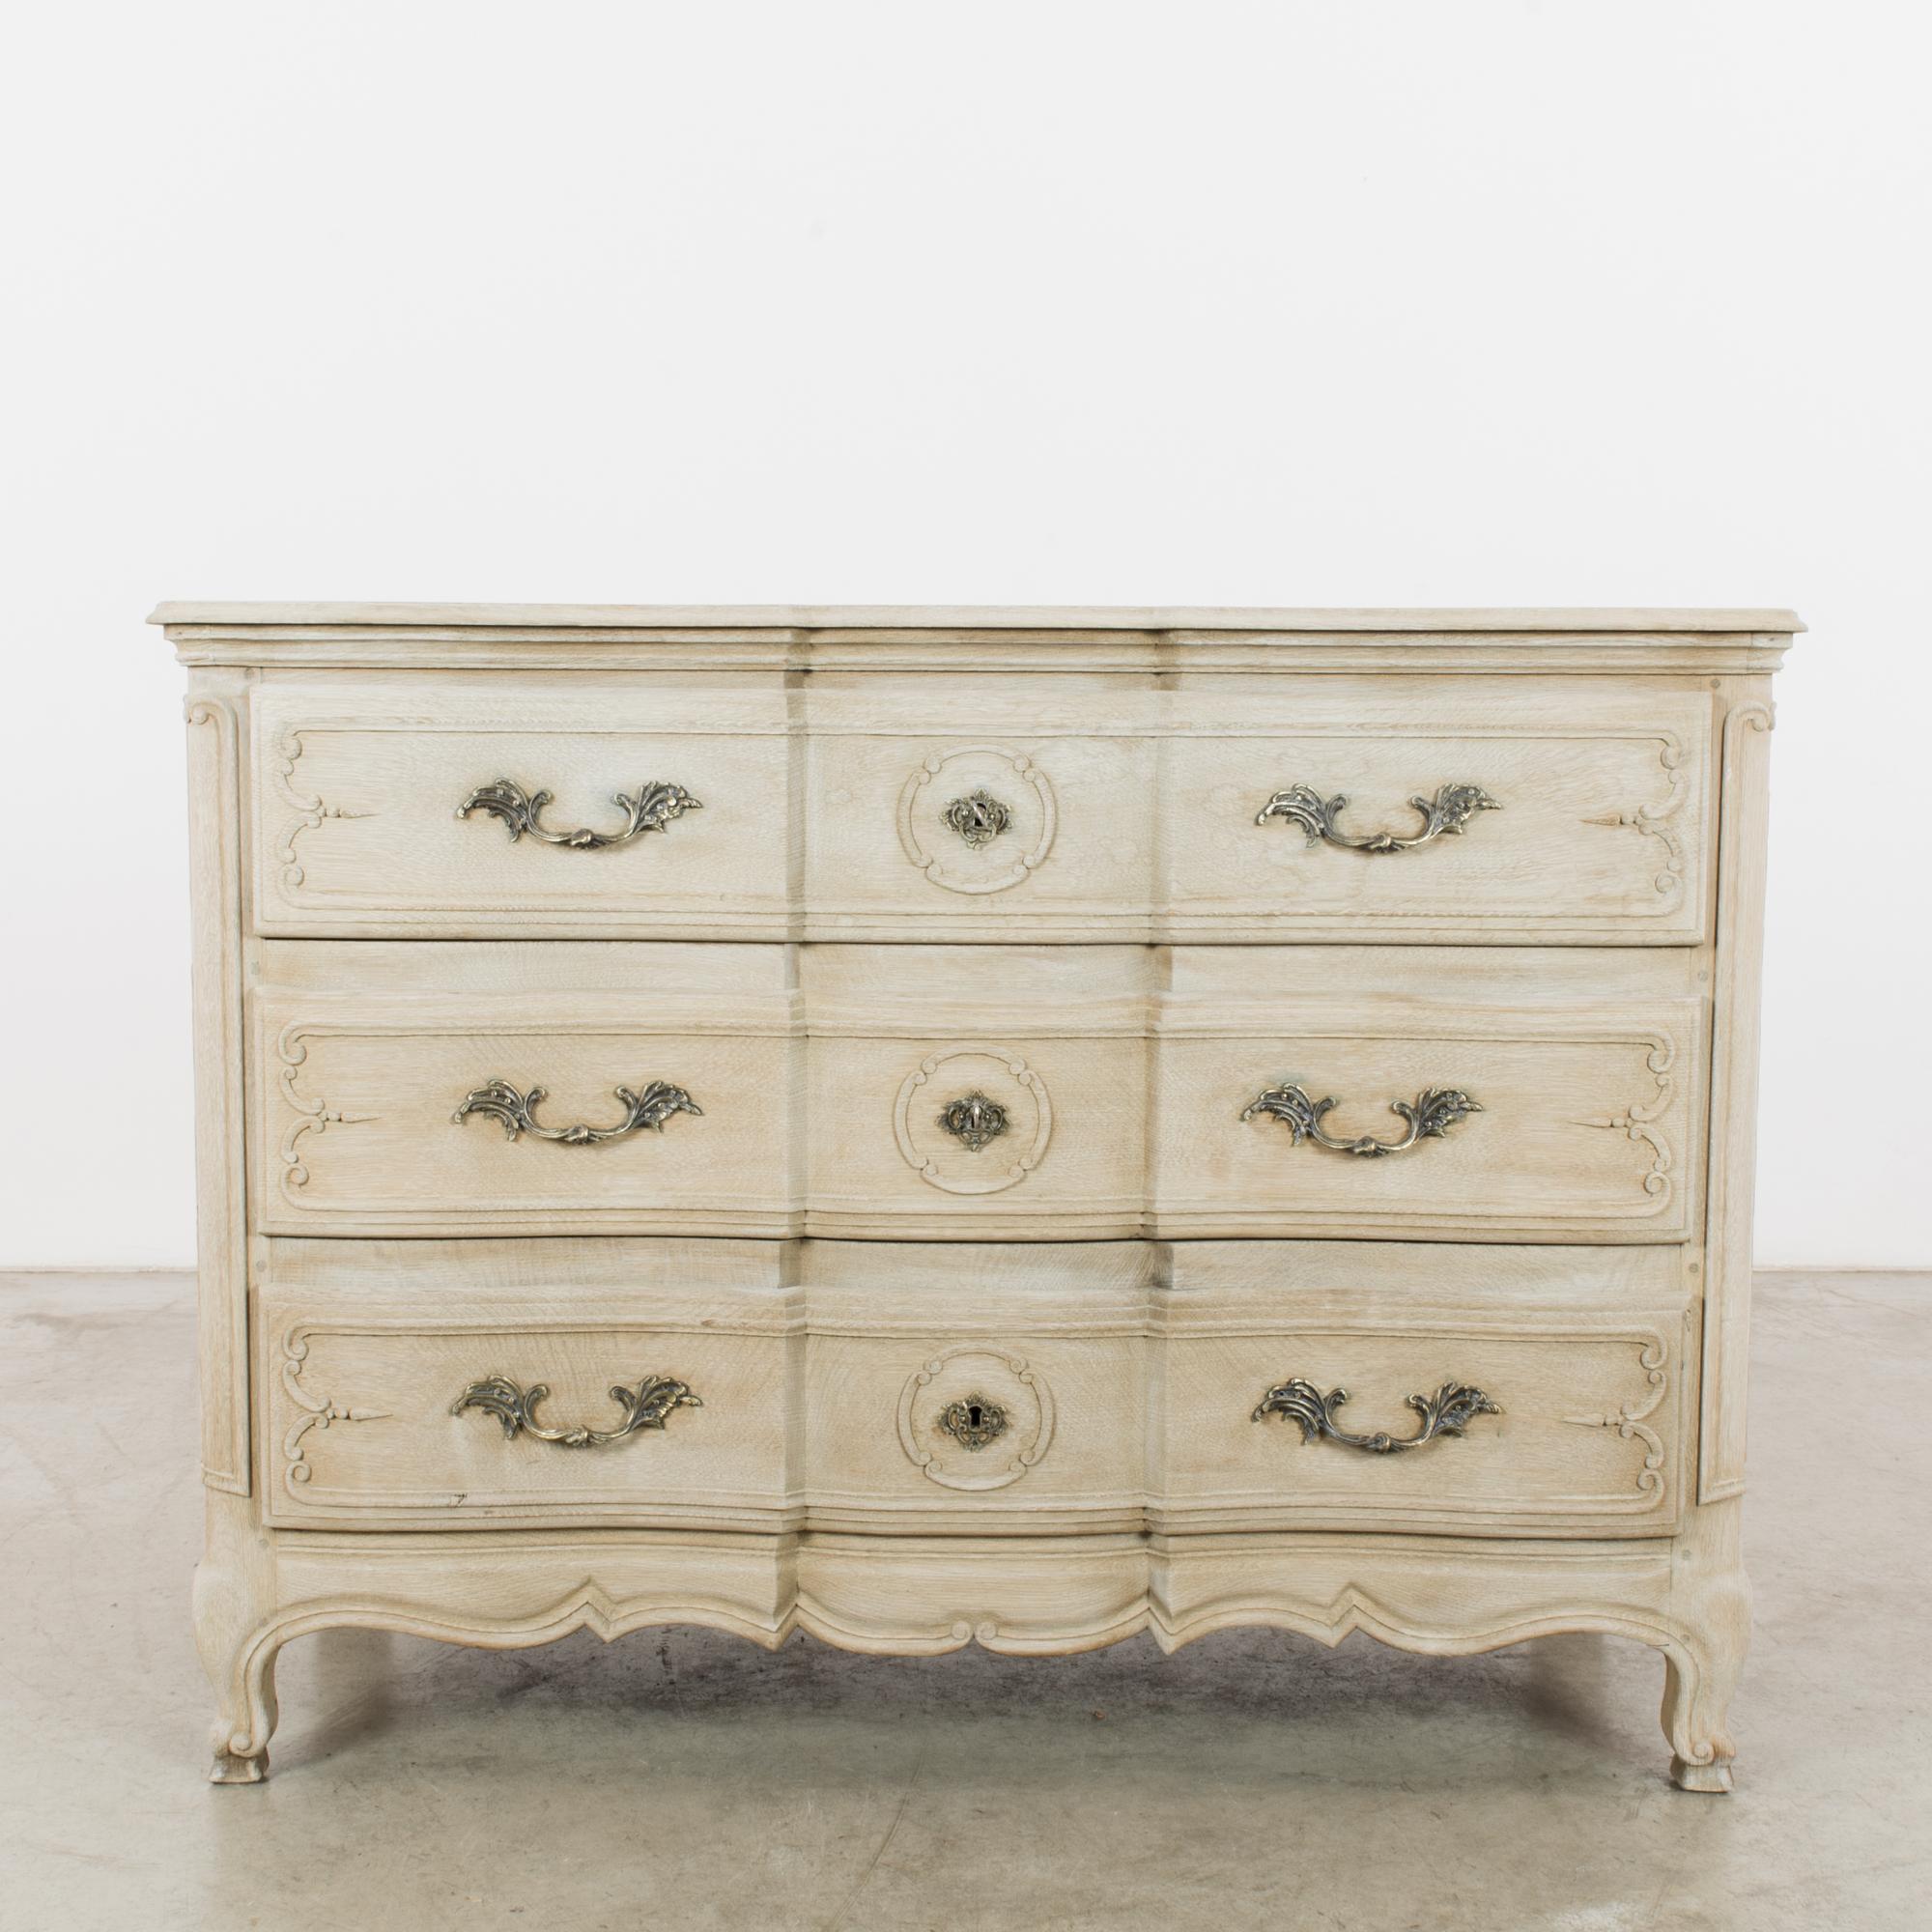 An oak chest of drawers from Belgium, circa 1900. A rococo shape with three serpentine drawers, which pull out with gilded filigree handles. Cabriole feet with dainty hooves elevate the cabinet; an undulating apron mimics the curves of the case. The